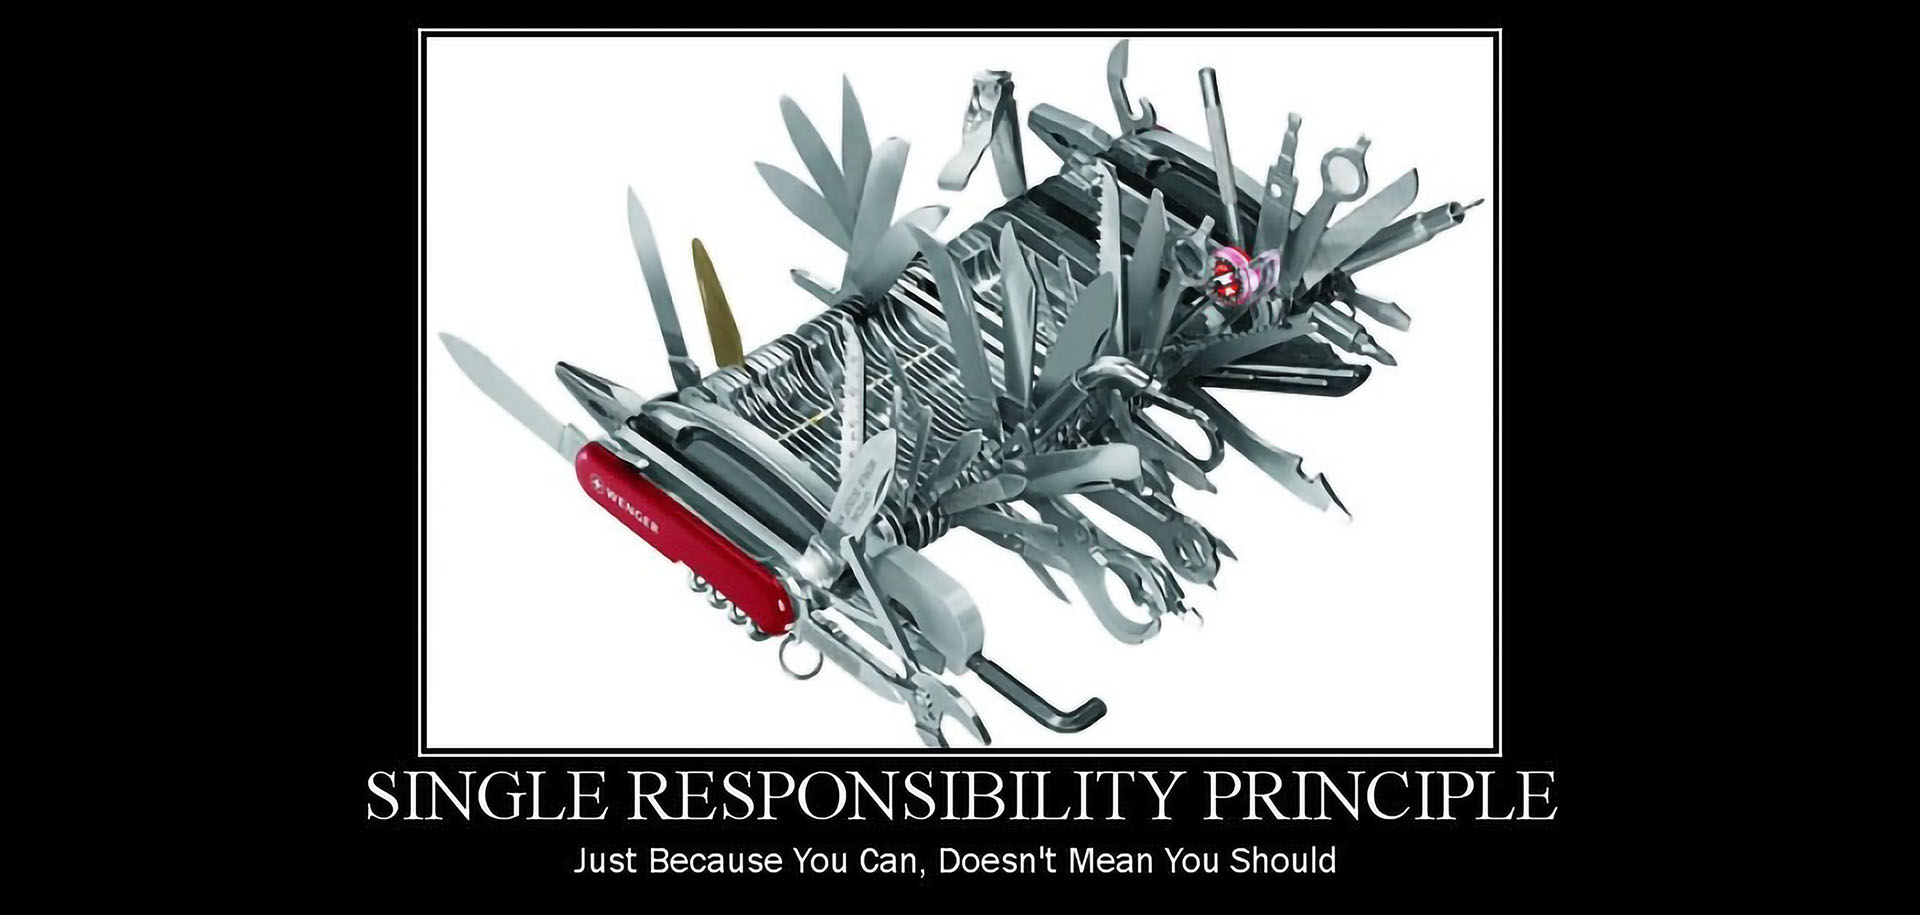 Single Responsibility Principle, one of the five SOLID principles